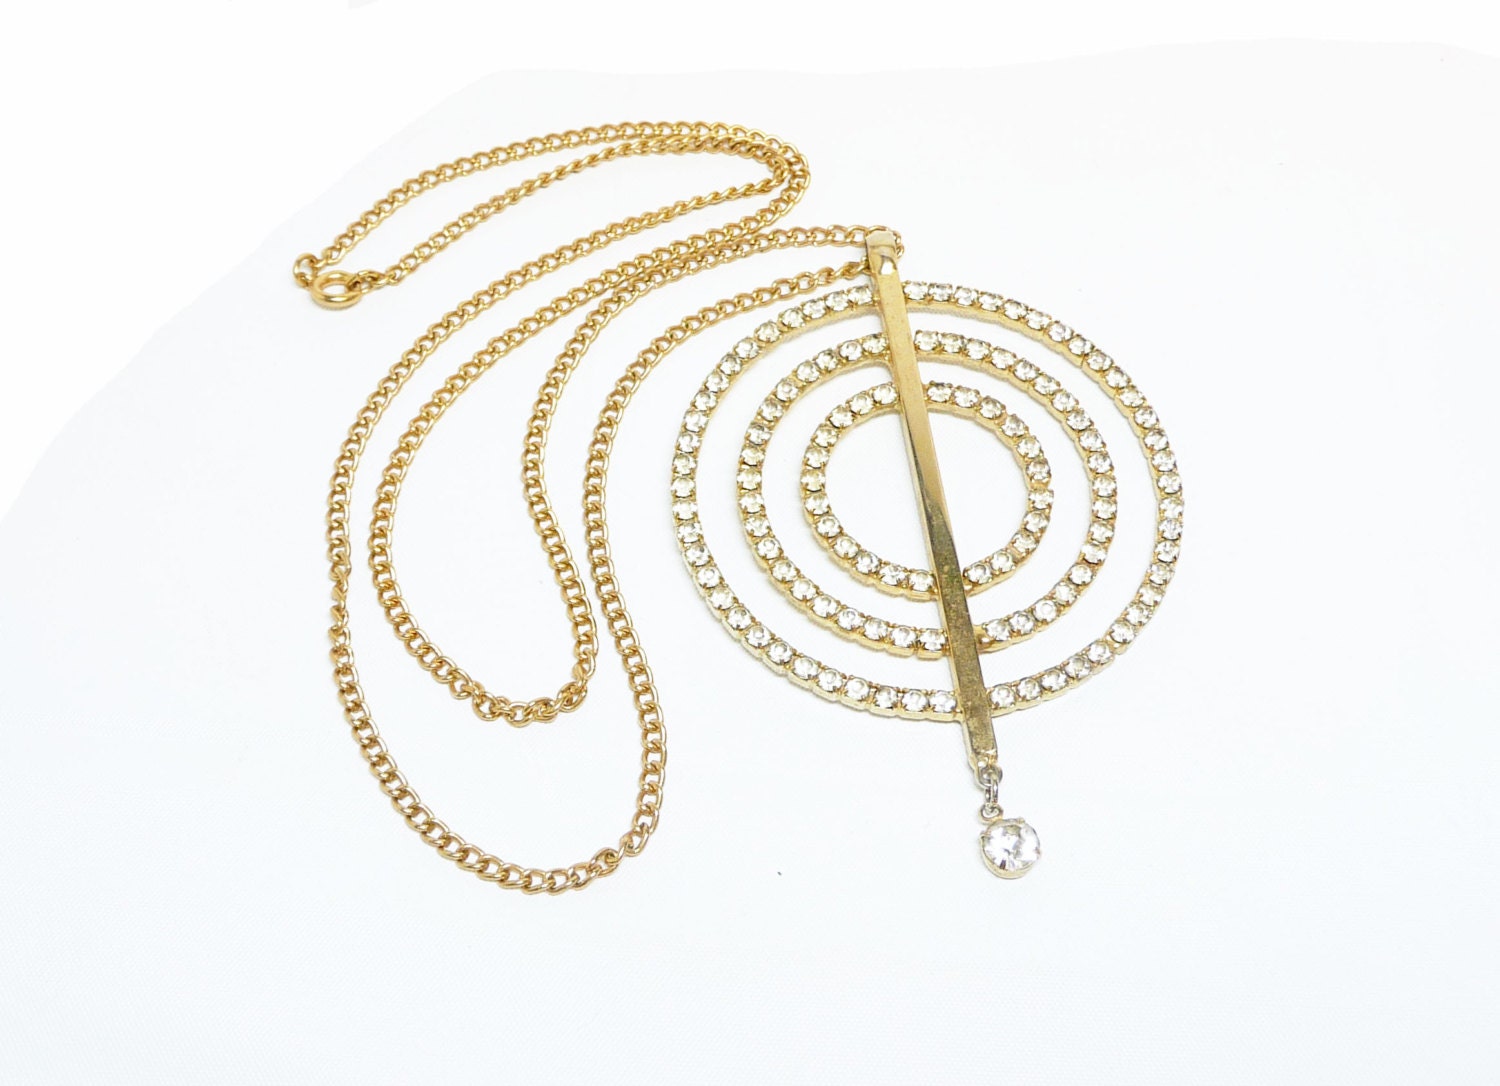 Retro Pendant & Skinny Chain – Mod Goldtone Circles with Clear ...